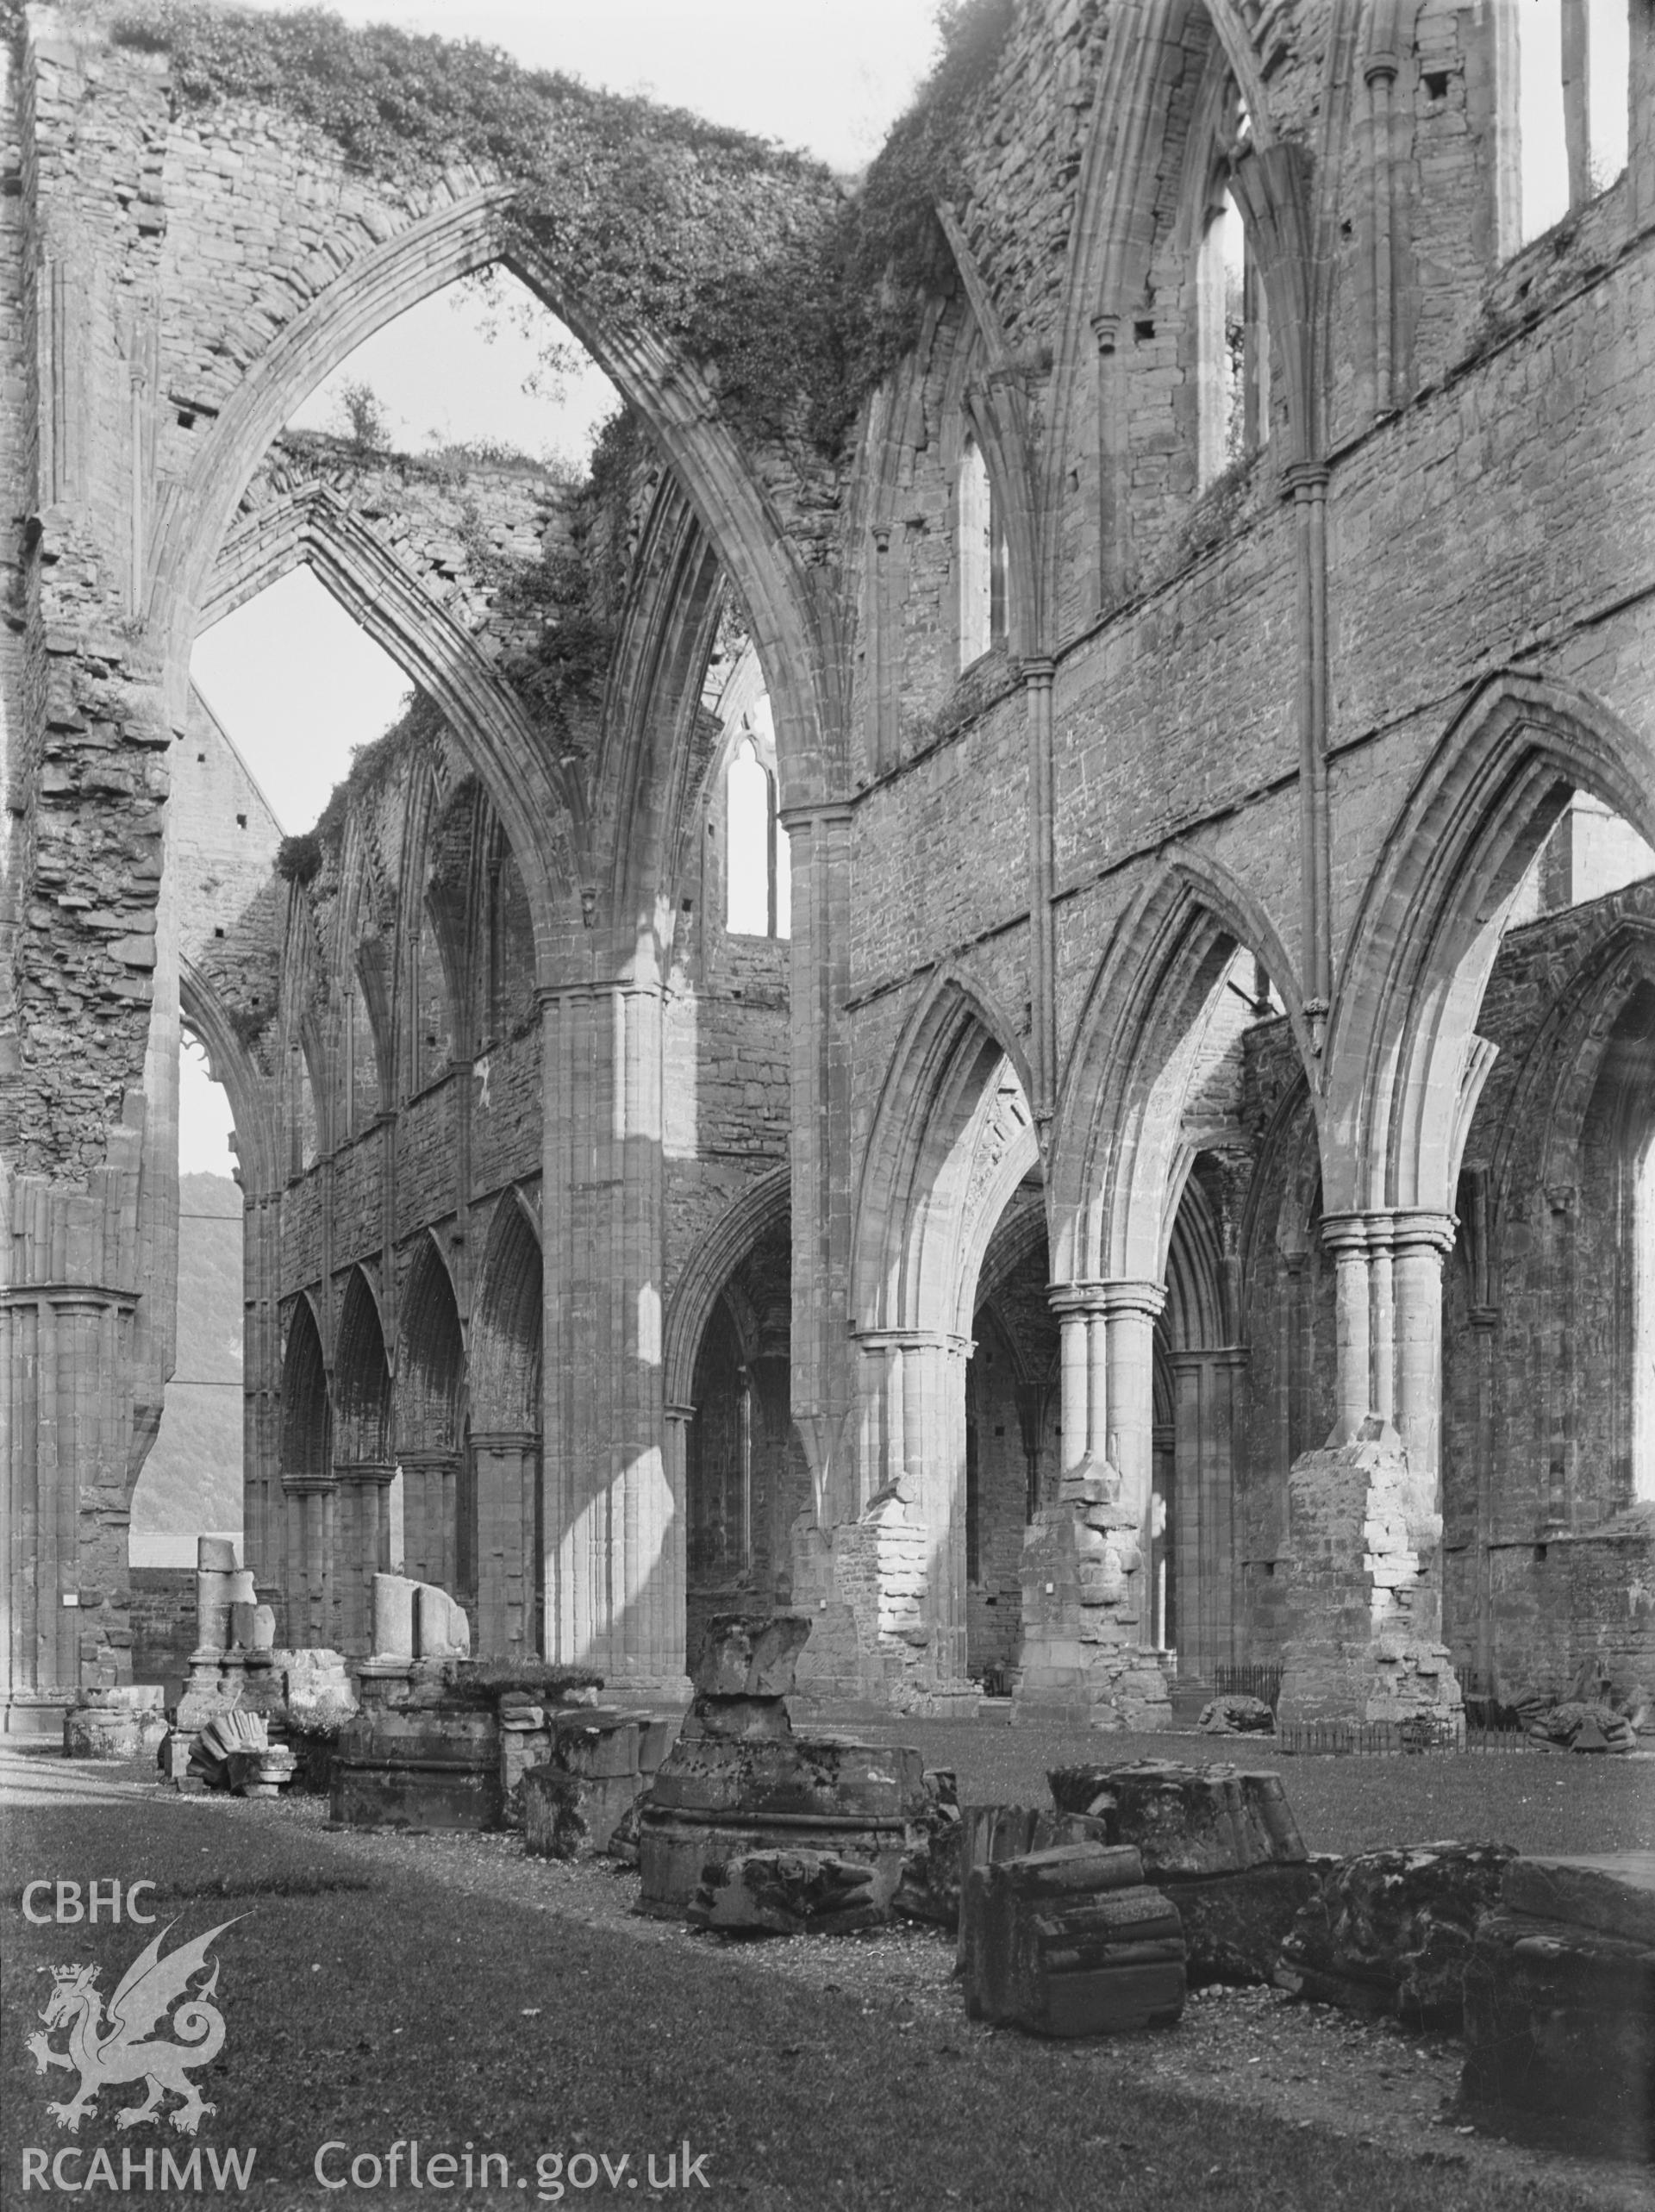 Black and white glass negative showing columns and arches at Tintern Abbey.